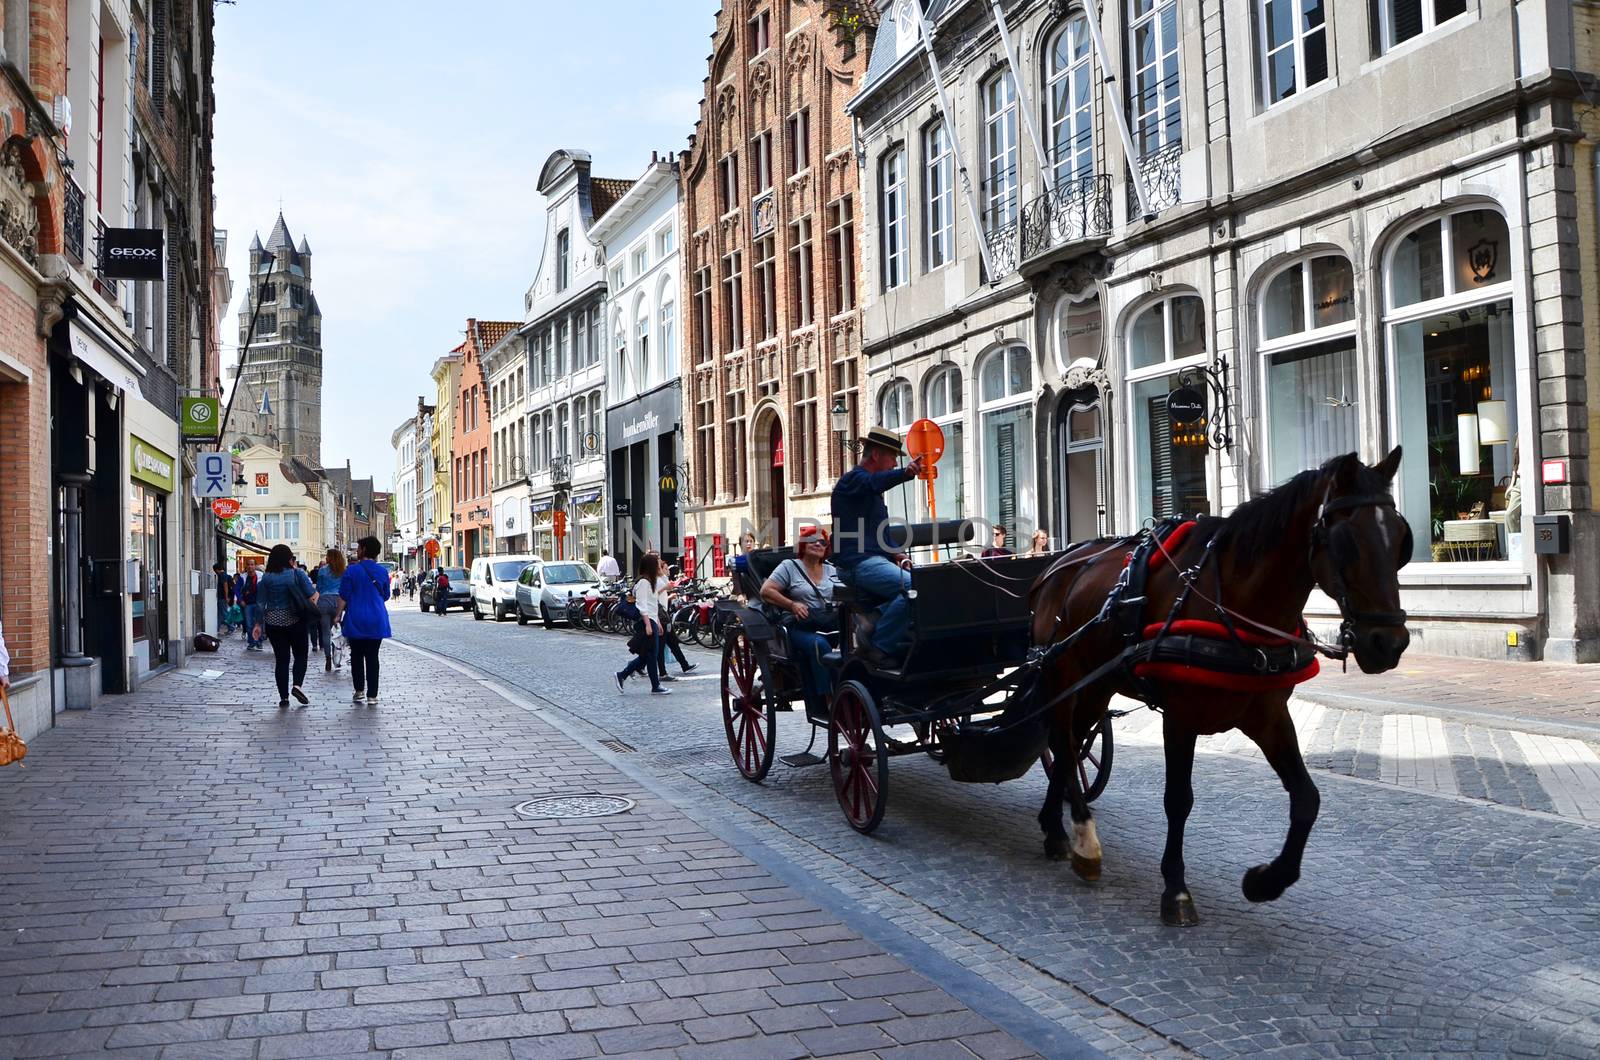 Bruges, Belgium - May 11, 2015: Tourists visit Bruges in traditional horse carriage around the city. by siraanamwong